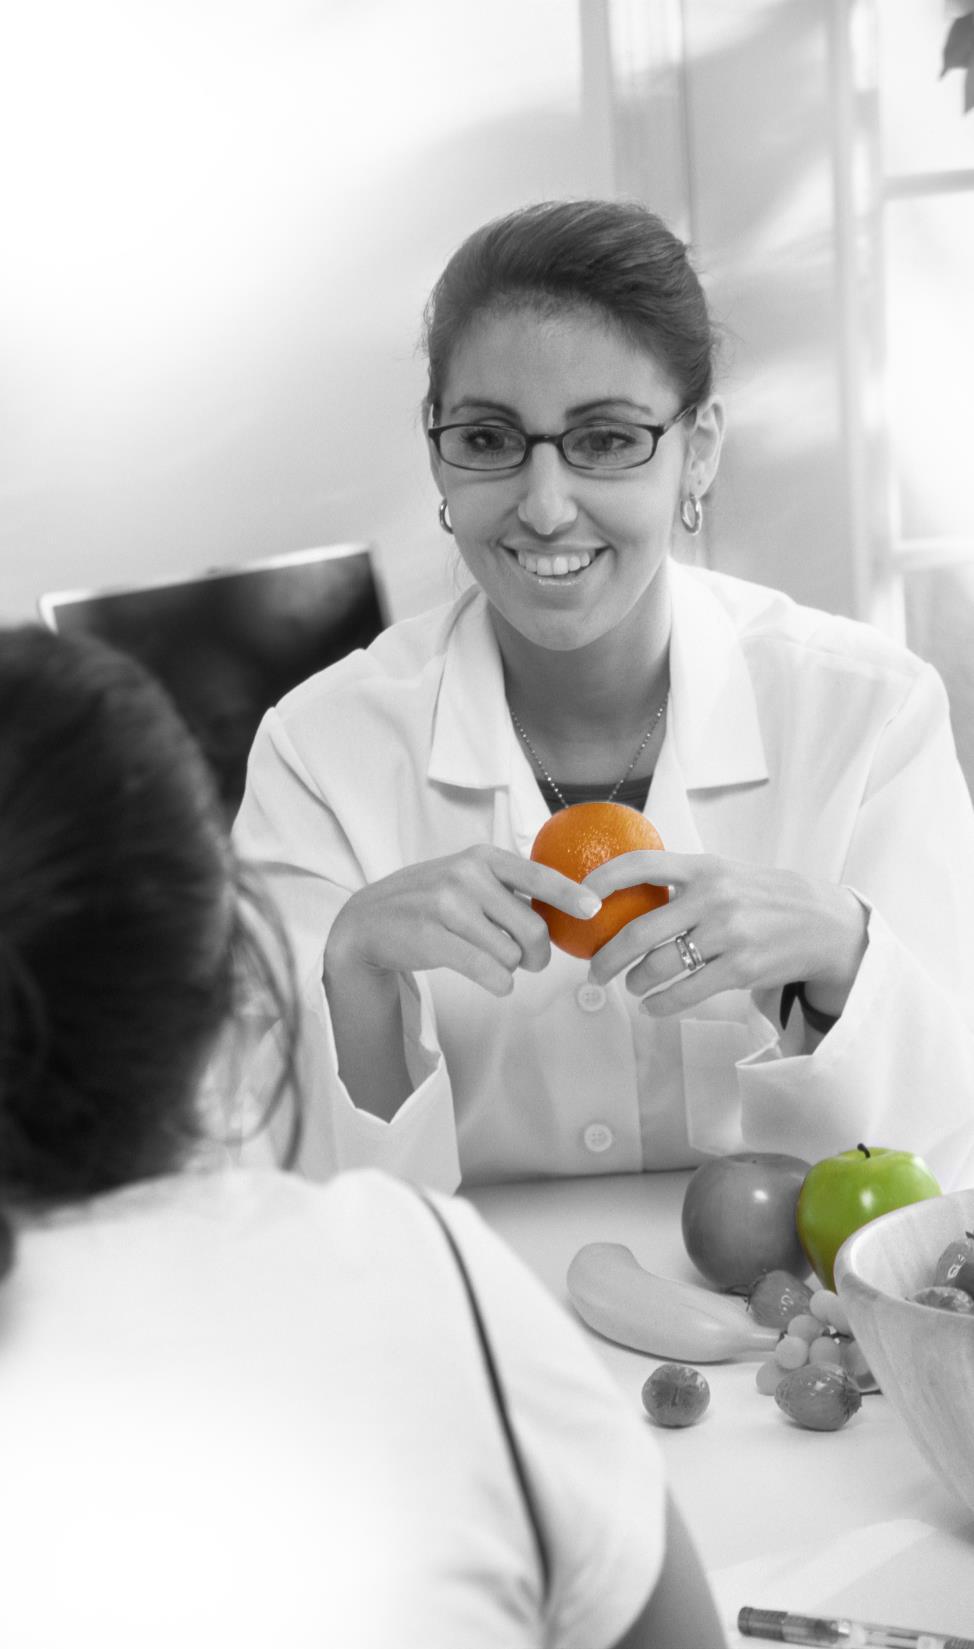 Inpatient Clinical Dietitian: Play a vital role in the healthcare team by providing nutritional care to patients in various disease states and conditions.